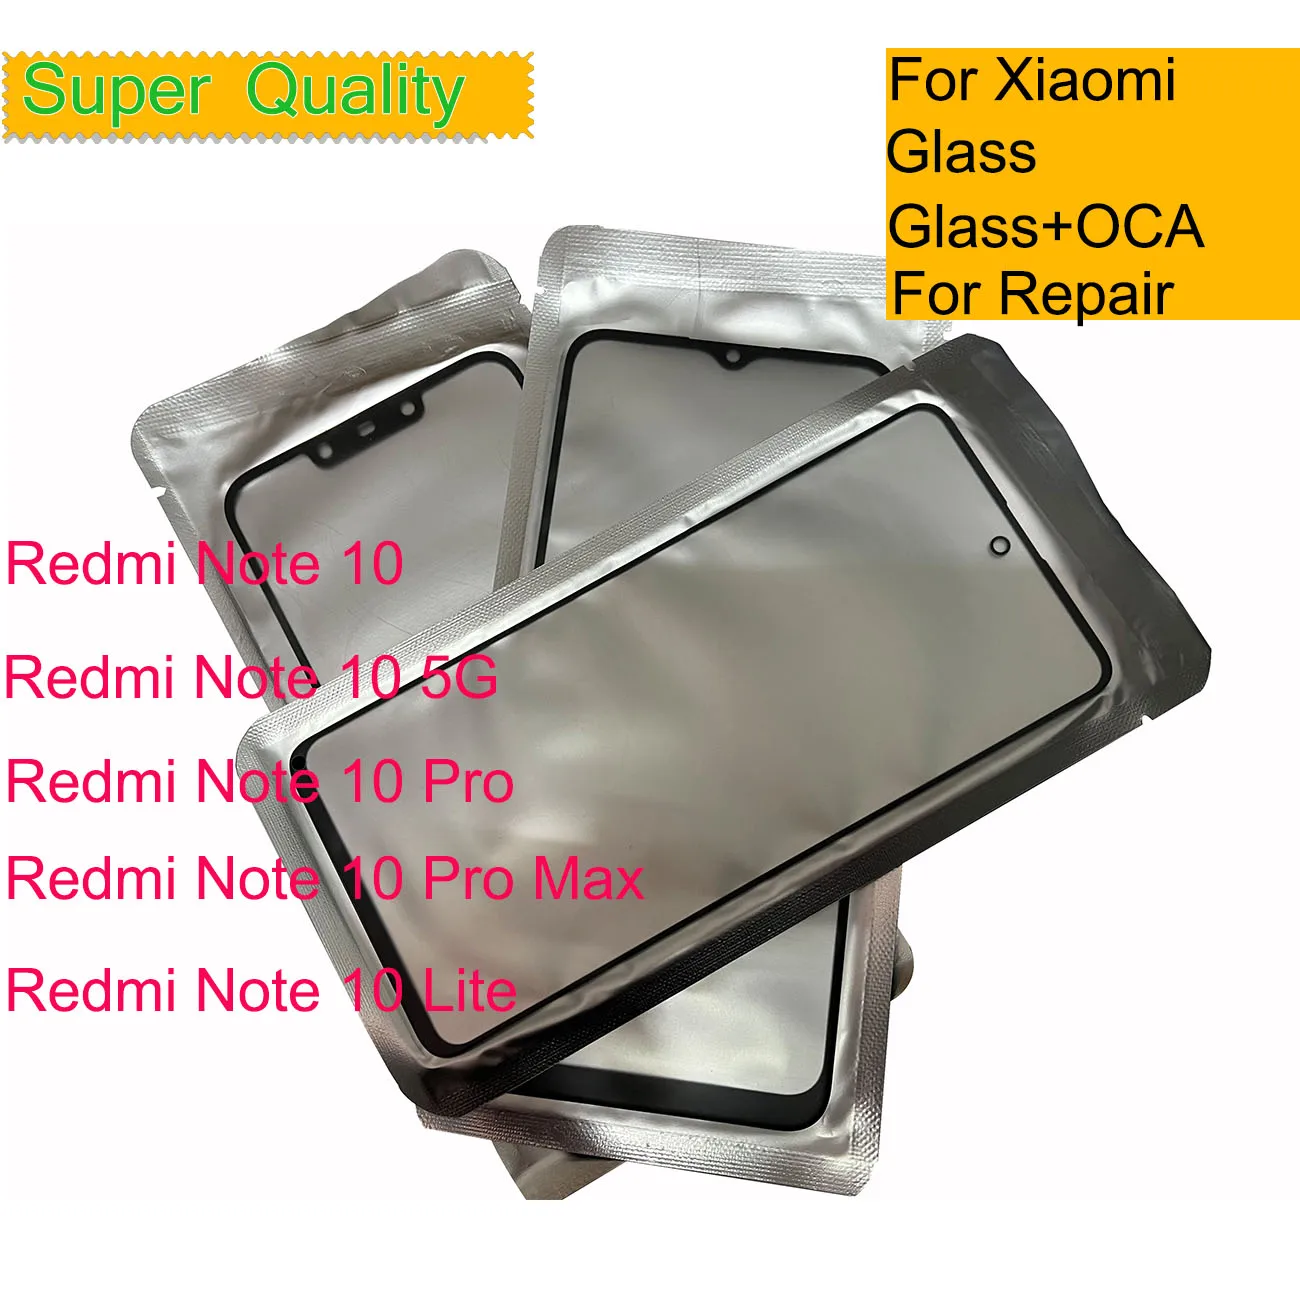 10Pcs/Lot For Xiaomi Redmi Note 10 Pro Max Touch Screen Panel Front Outer Glass Lens For Redmi Note 10 5G Glass With OCA Glue